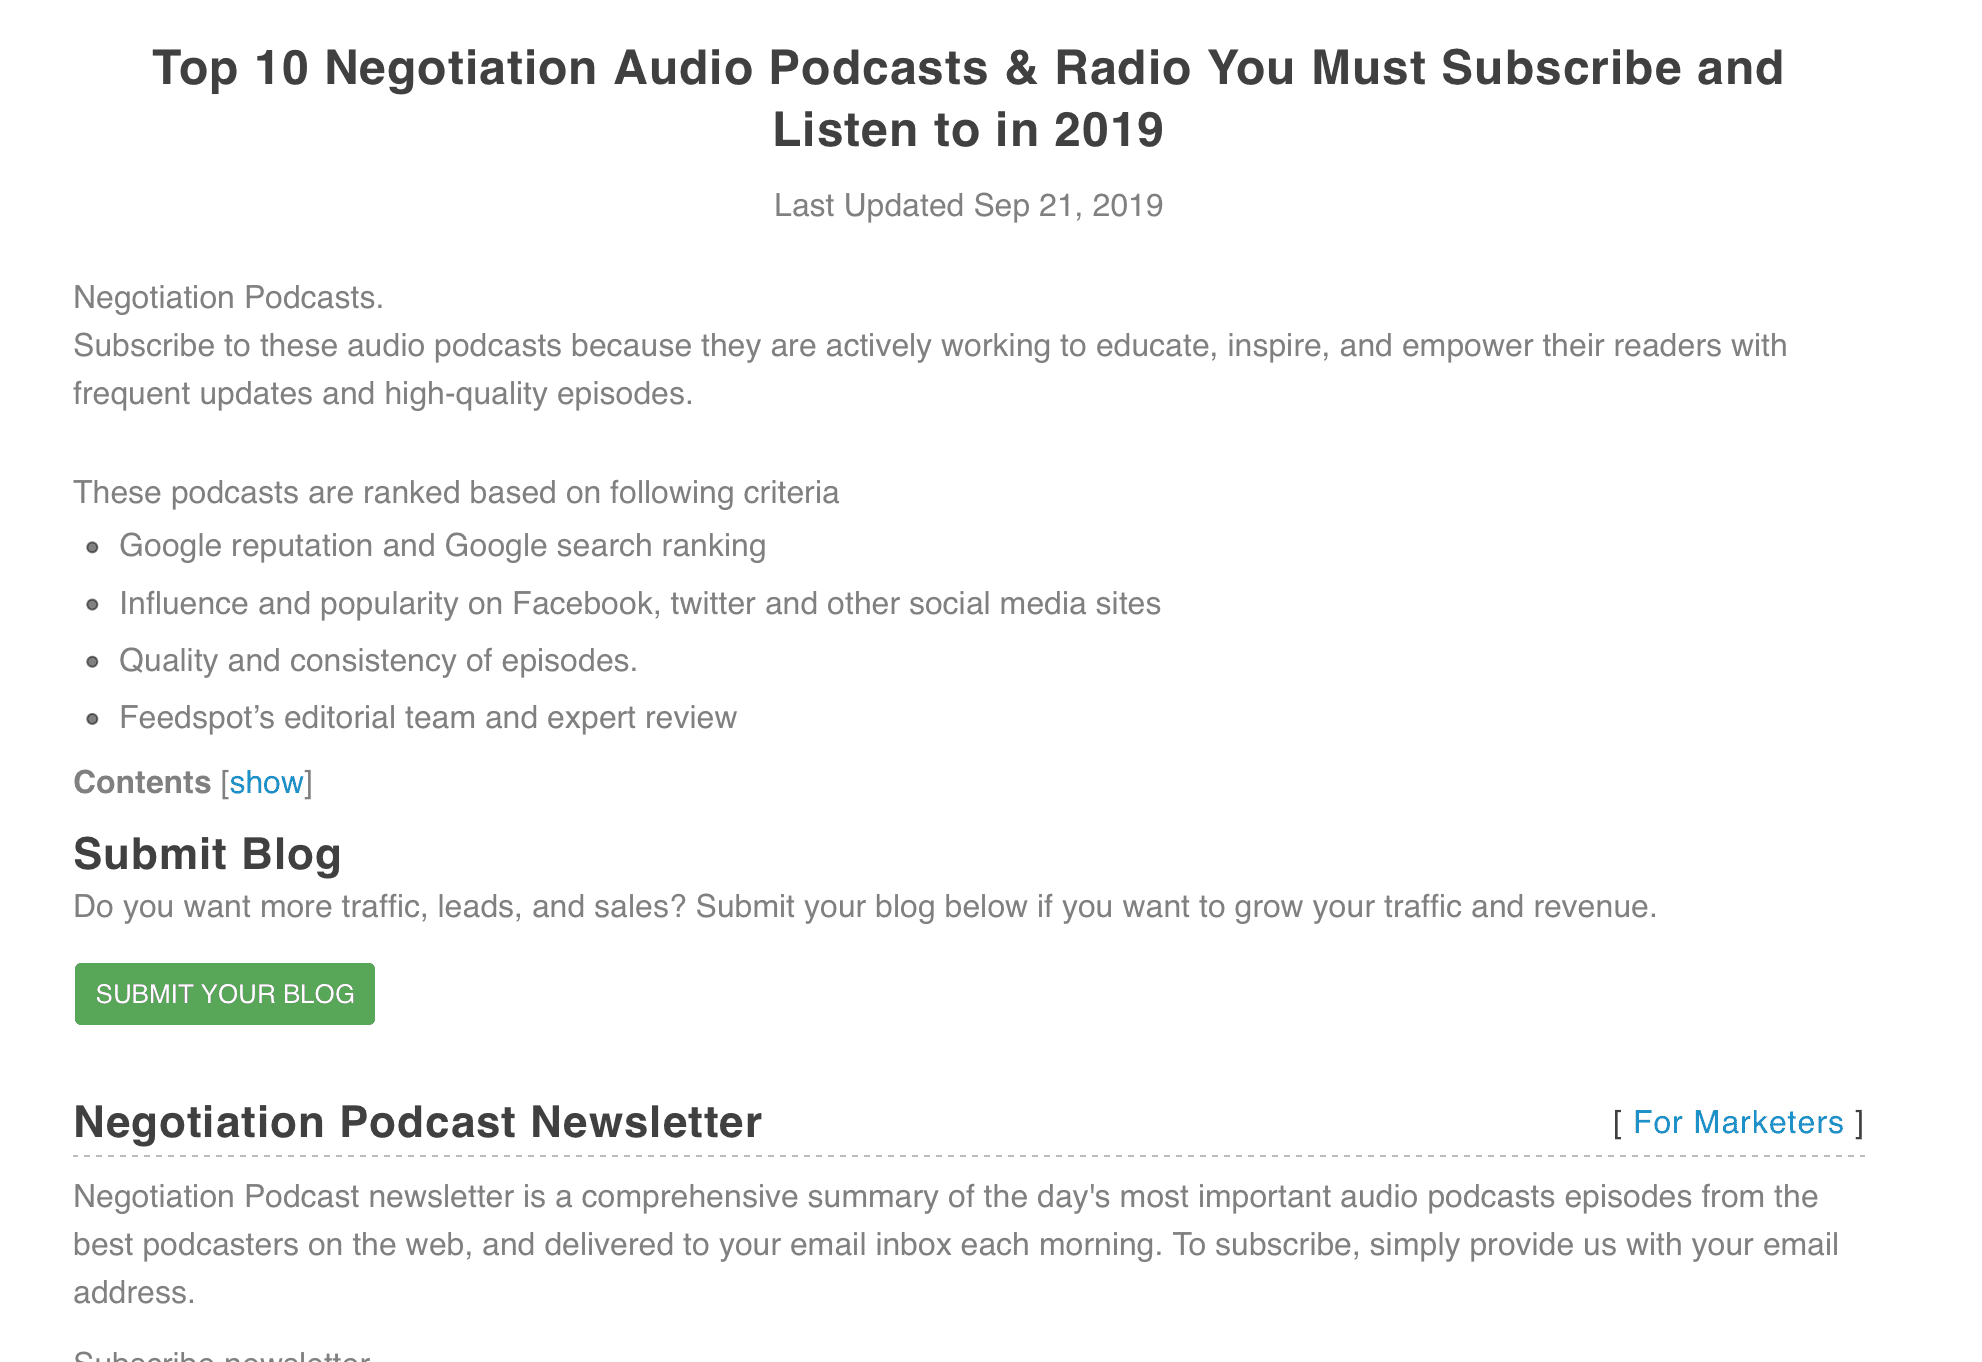 Top 10 Negotiation Audio Podcasts & Radio You Must Subscribe and Listen to in 2019